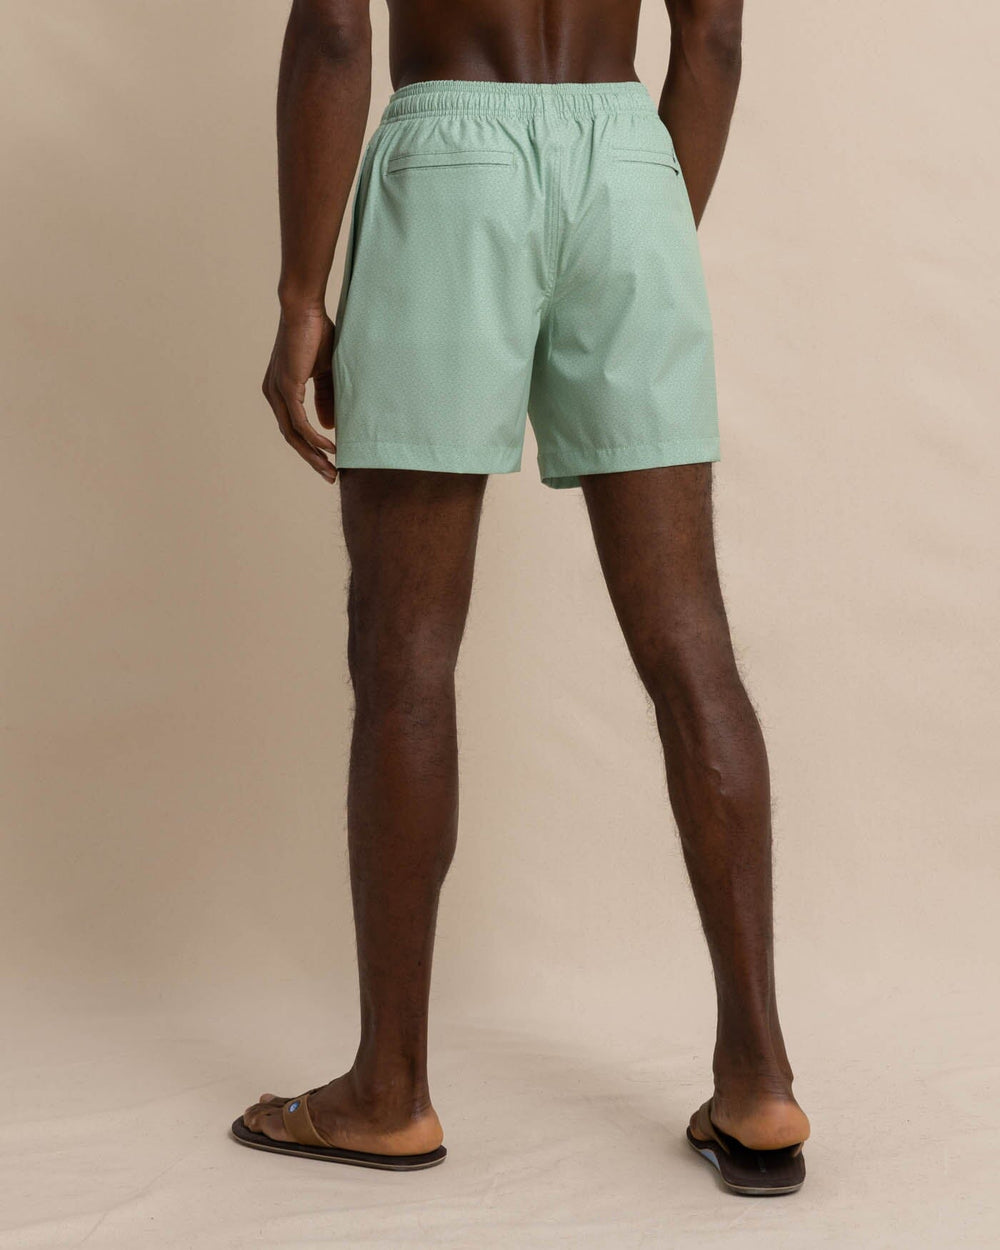 The back view of the Southern Tide It's Wavey Baby Swim Trunk by Southern Tide - Basil Green